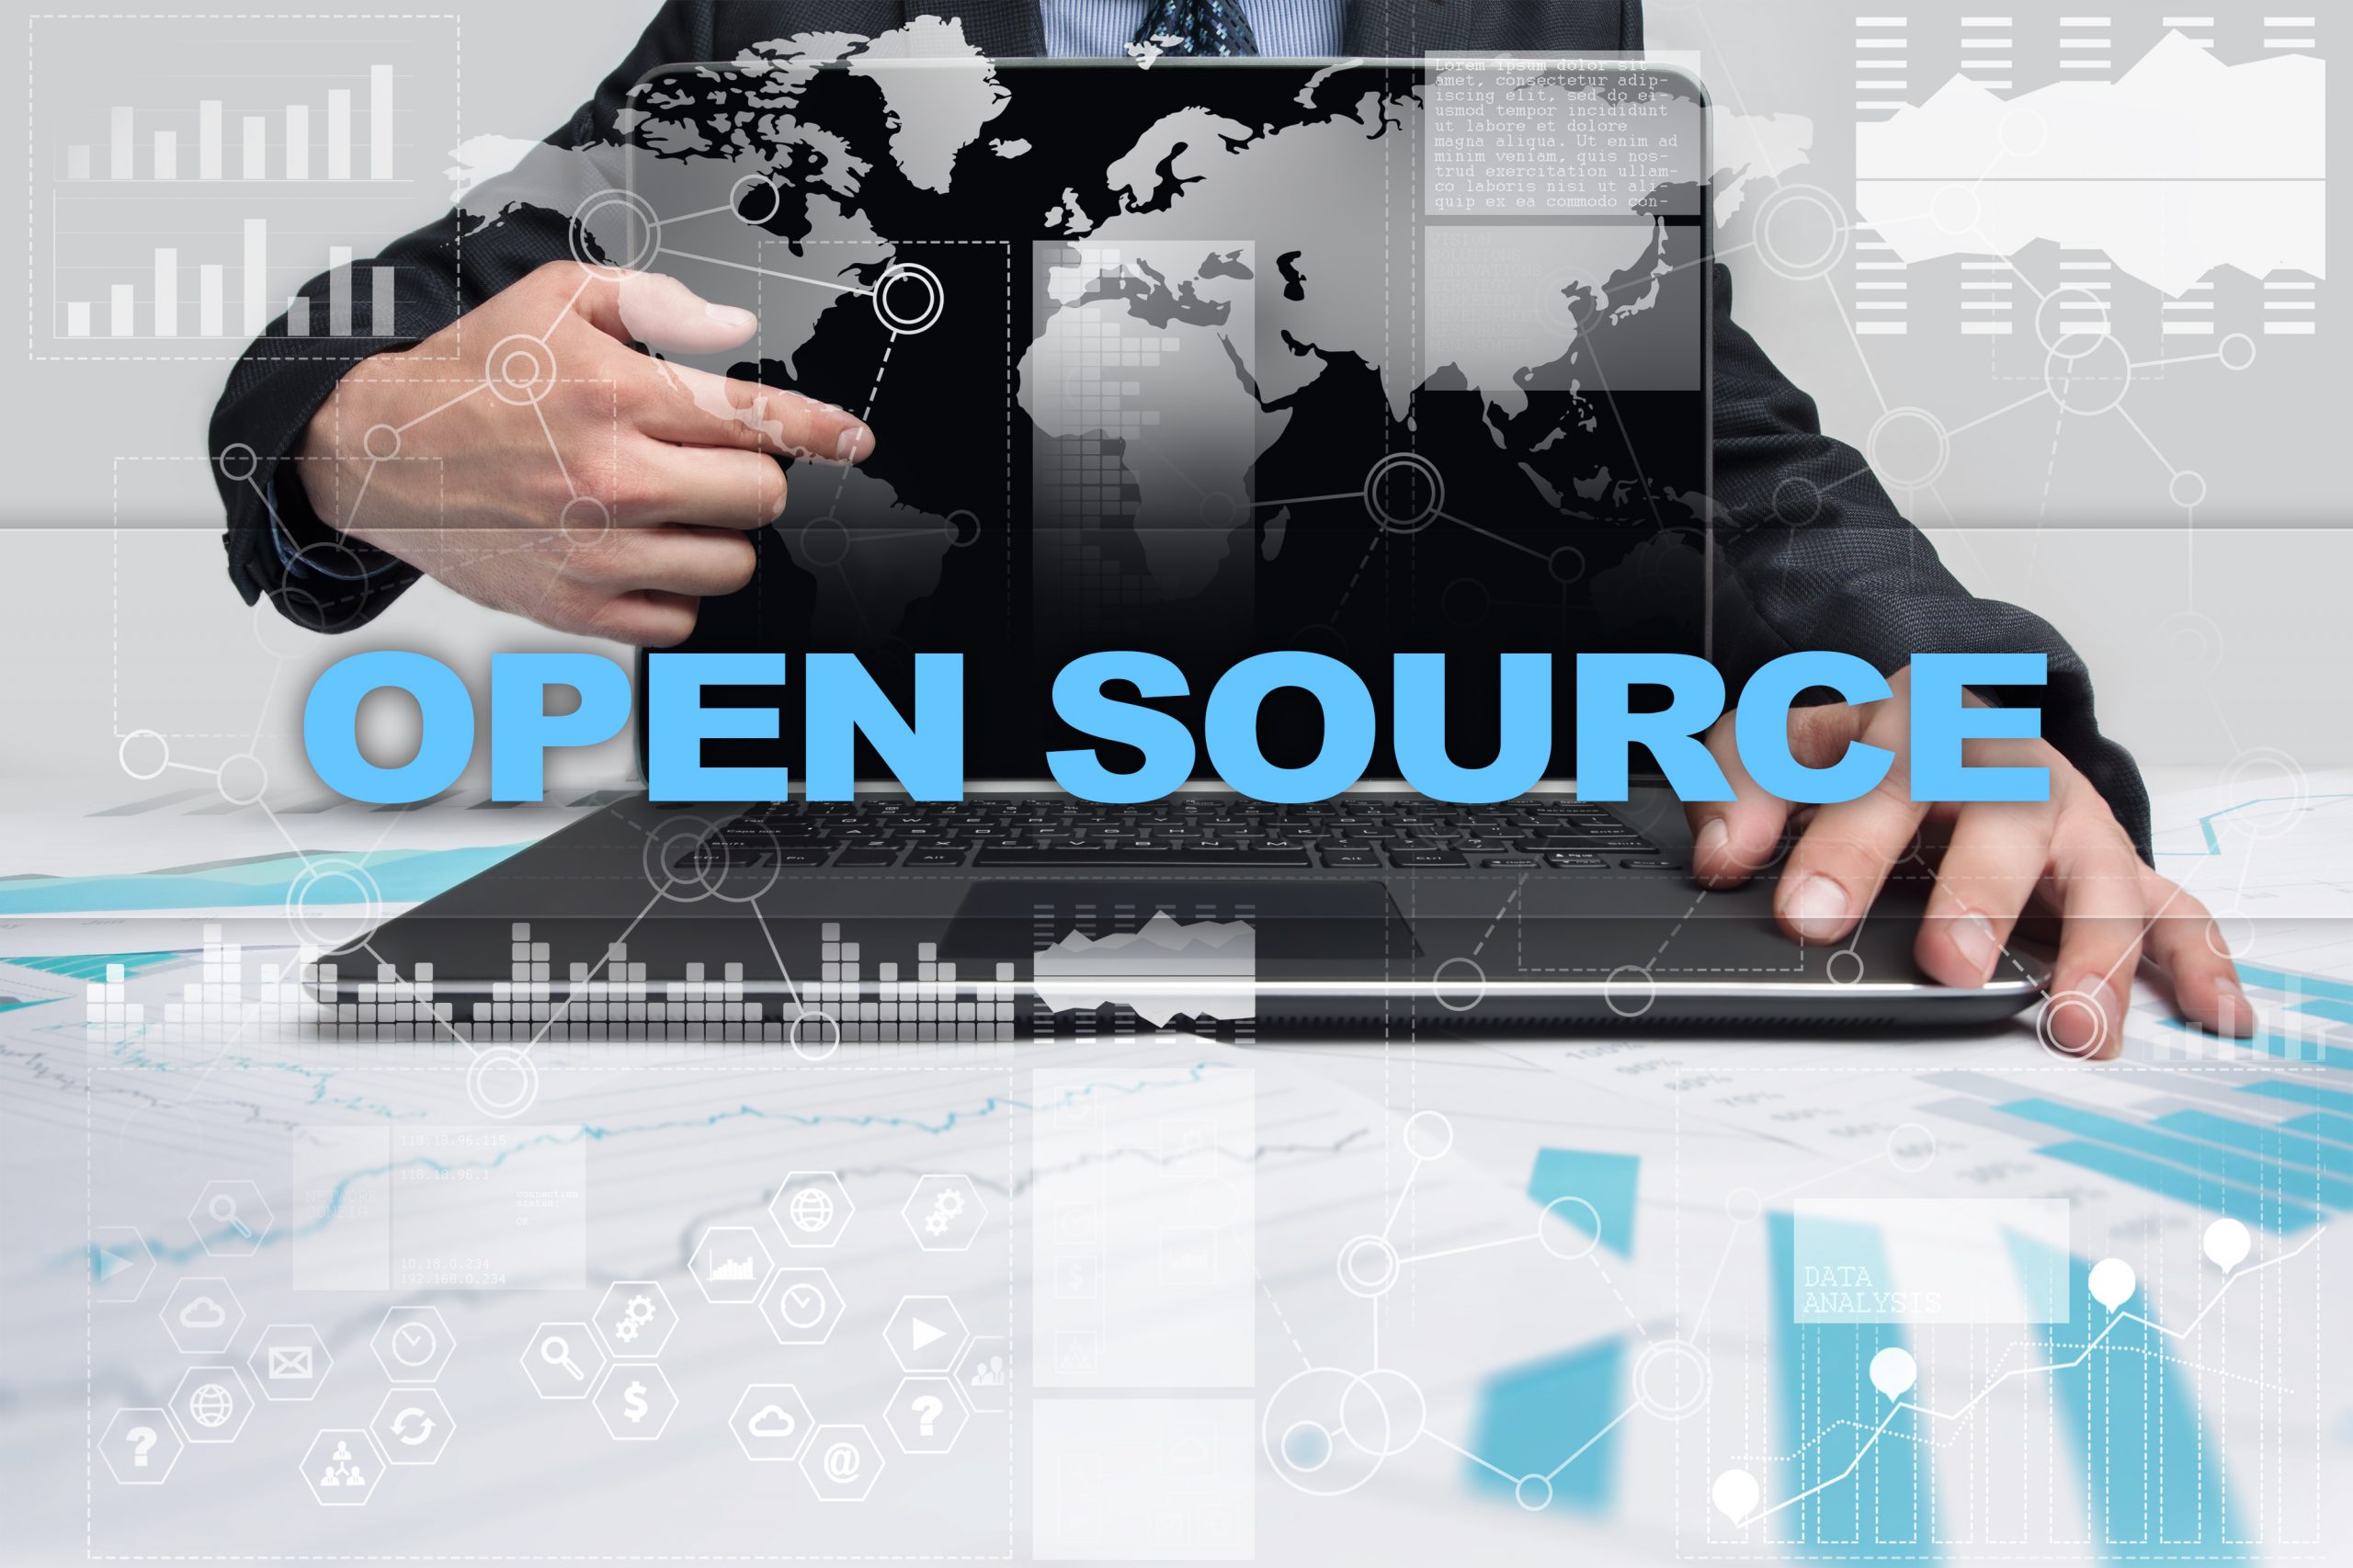 OPEN-SOURCE INTELLIGENCE (OSINT): HOW IT WORKS AND THE IMPORTANT ROLE IT PLAYS